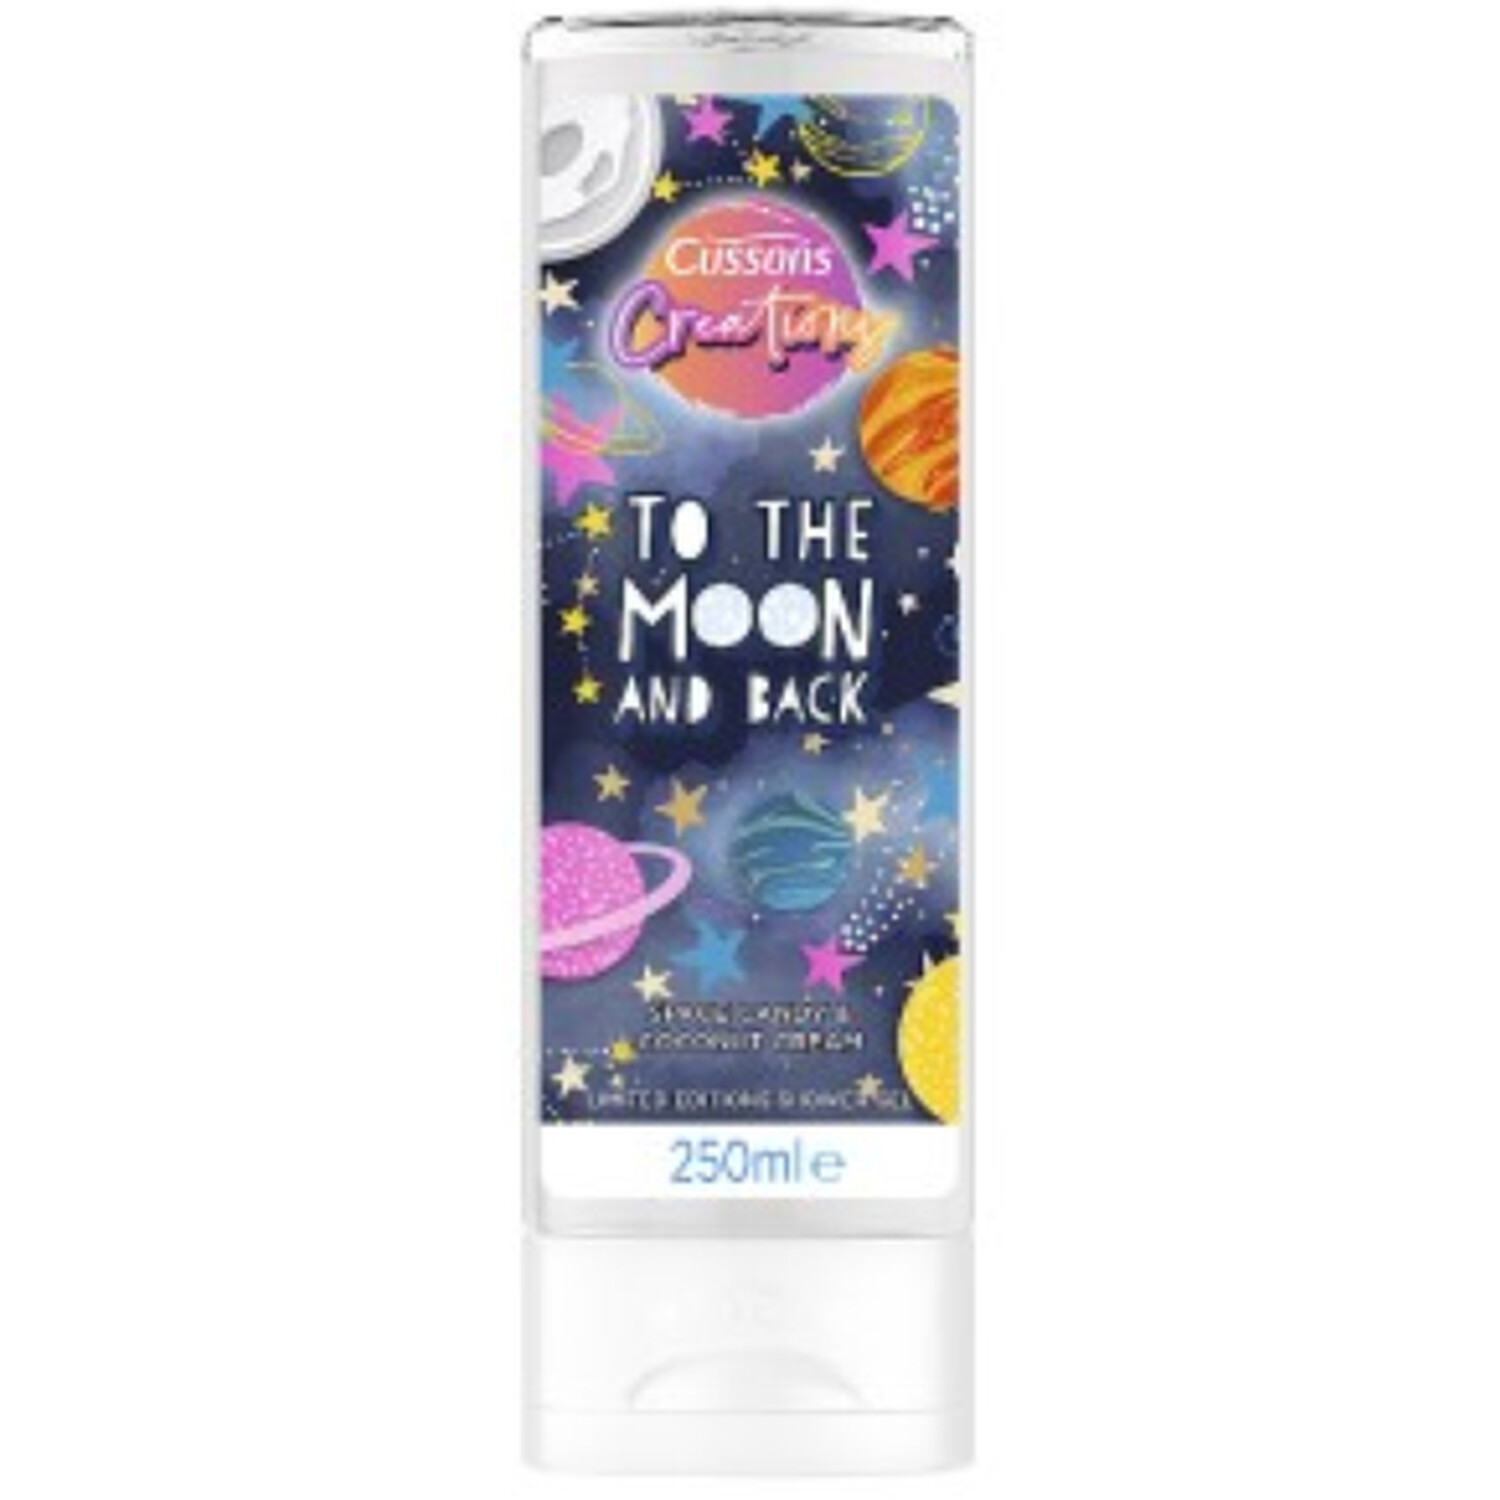 Cussons Creations To the Moon and Back Shower Gel - White Image